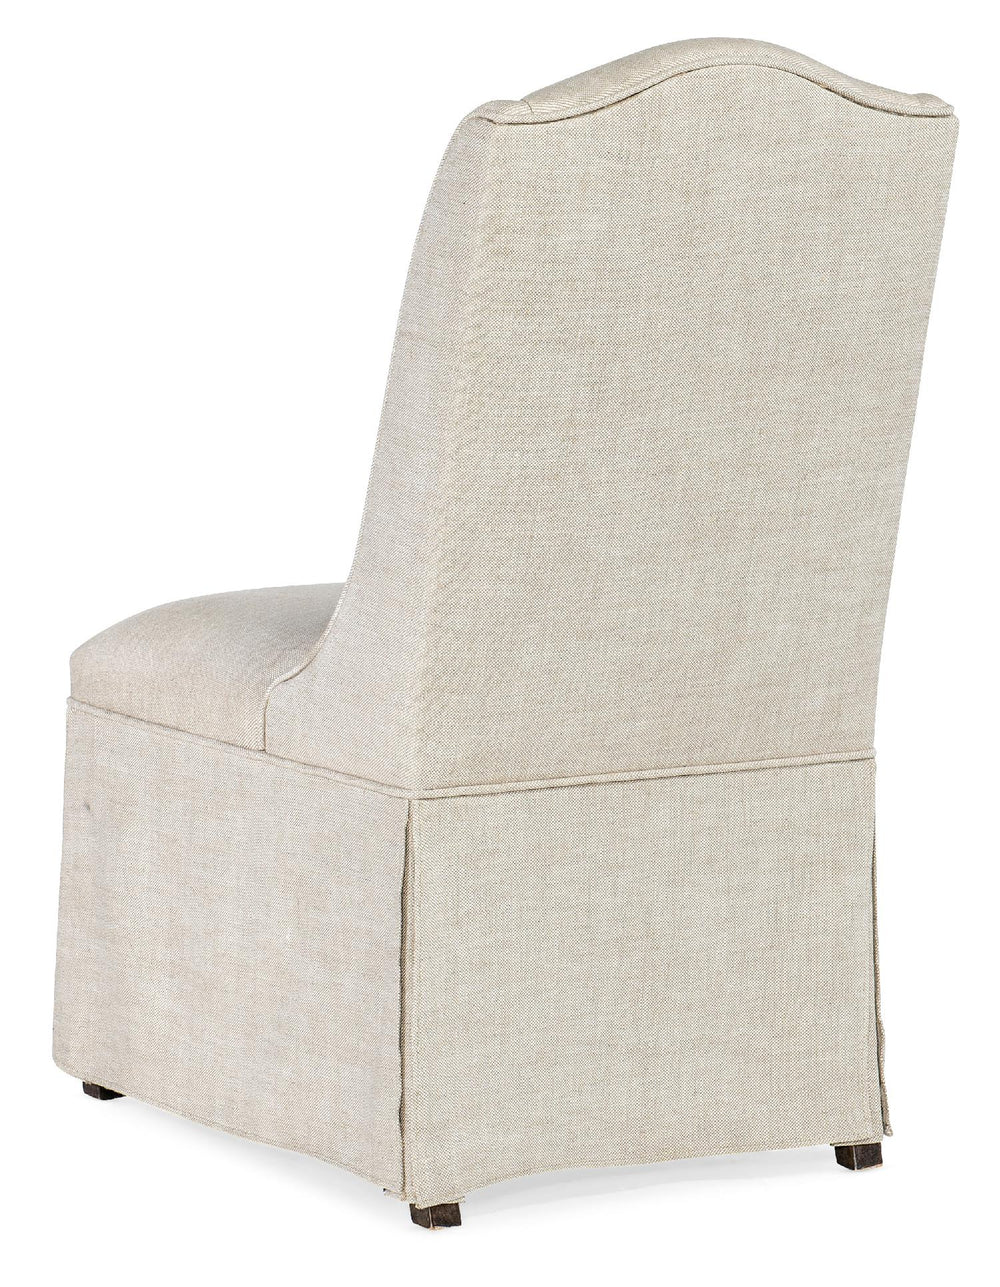 American Home Furniture | Hooker Furniture - Traditions Slipper Side Chair - Set of 2